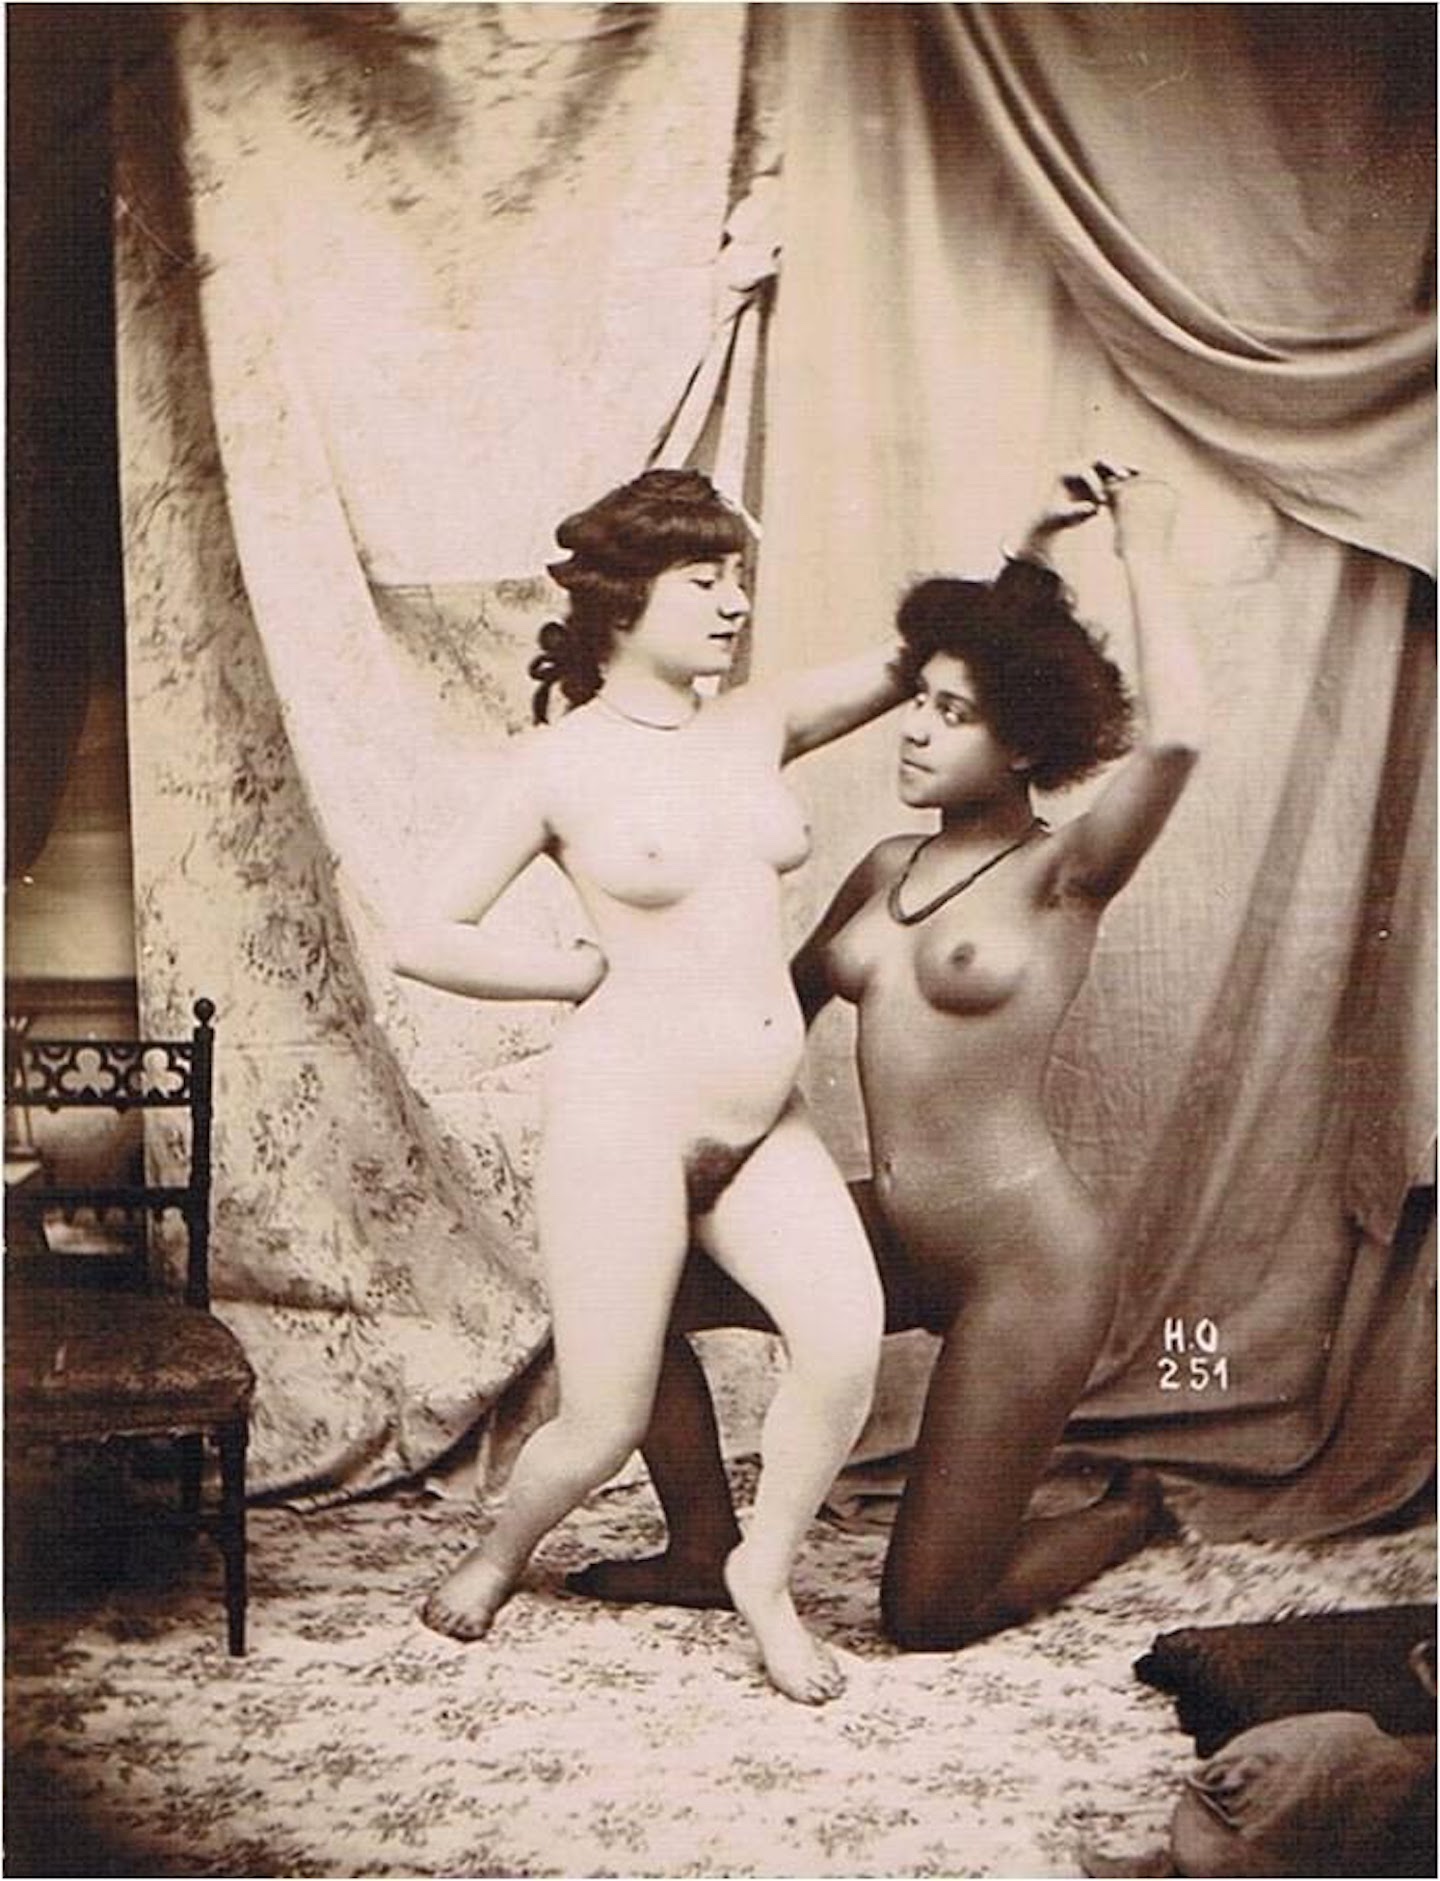 Historical Themed Porn - The Unbridled Joy of Victorian Porn